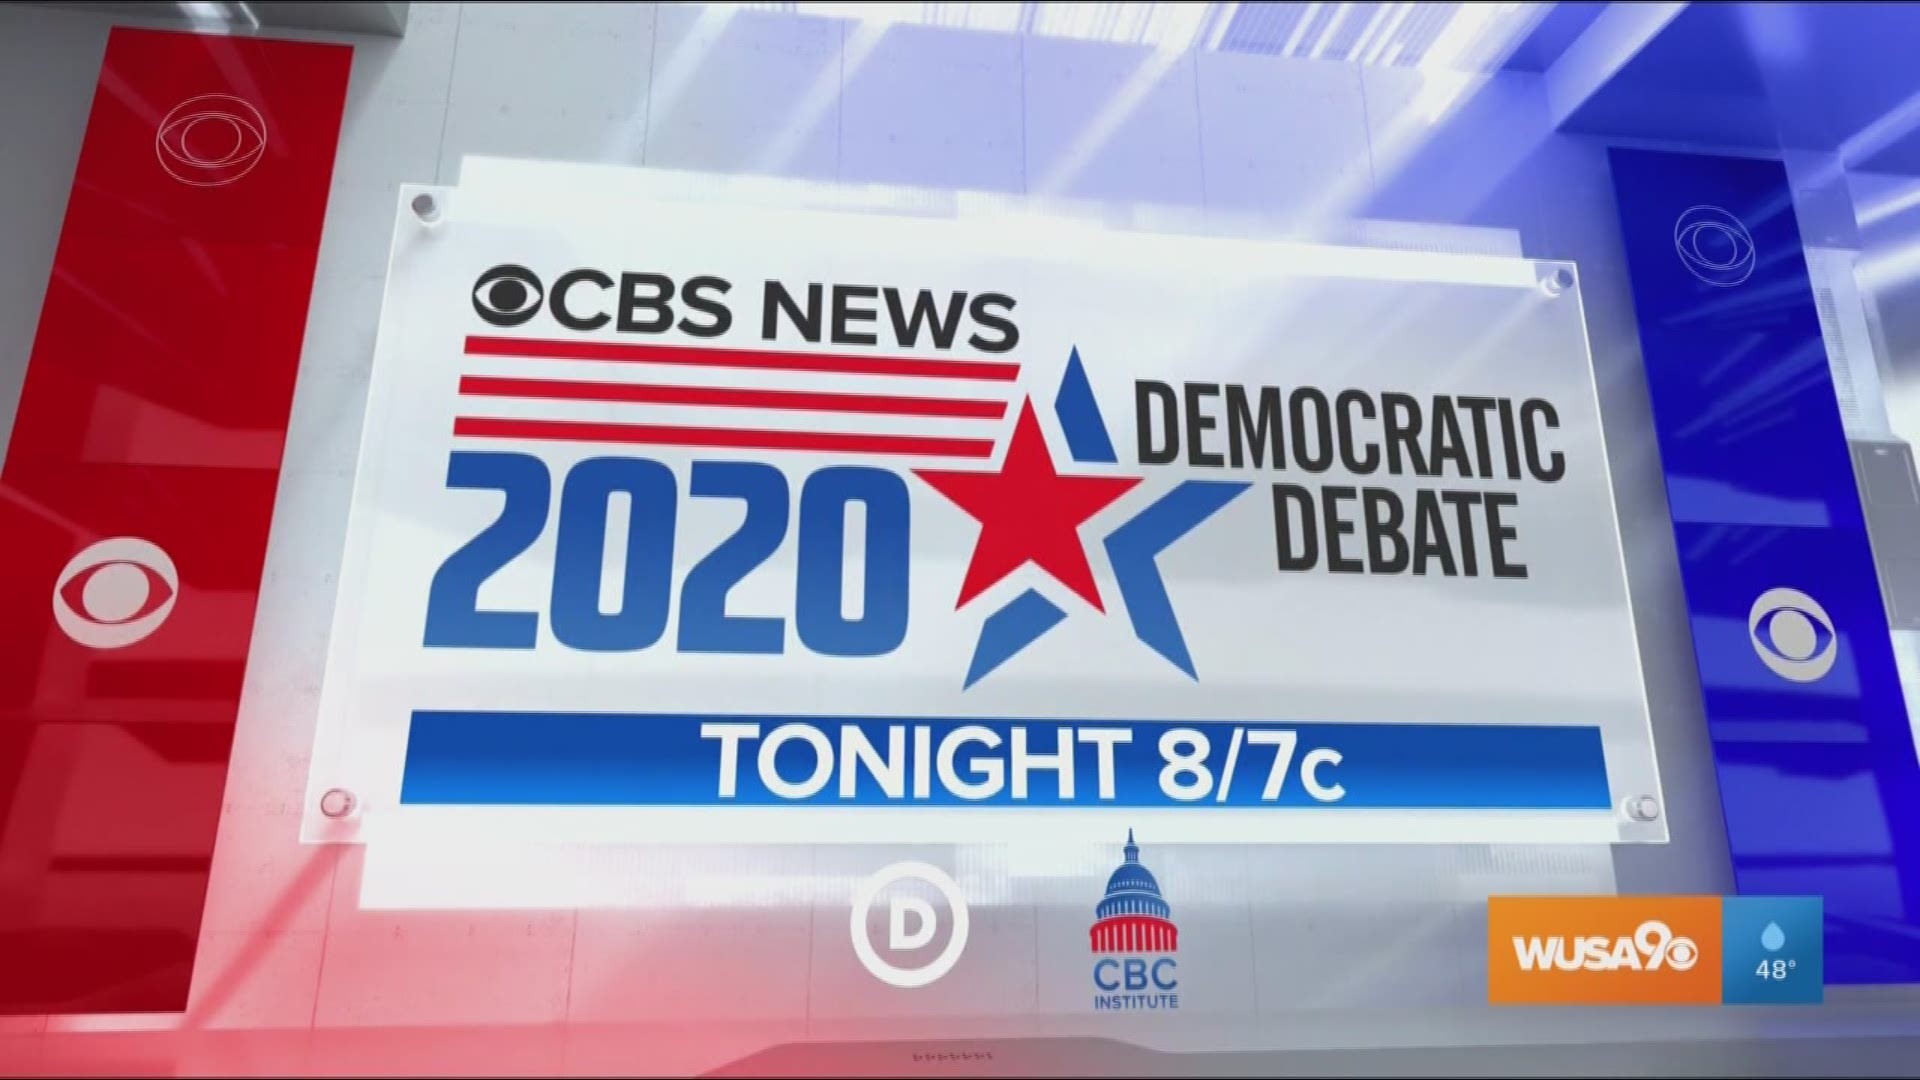 Margaret Brennan, senior foreign affairs correspondent and Face the Nation moderator discusses what's at stake for tonight's democratic debate in South Carolina.